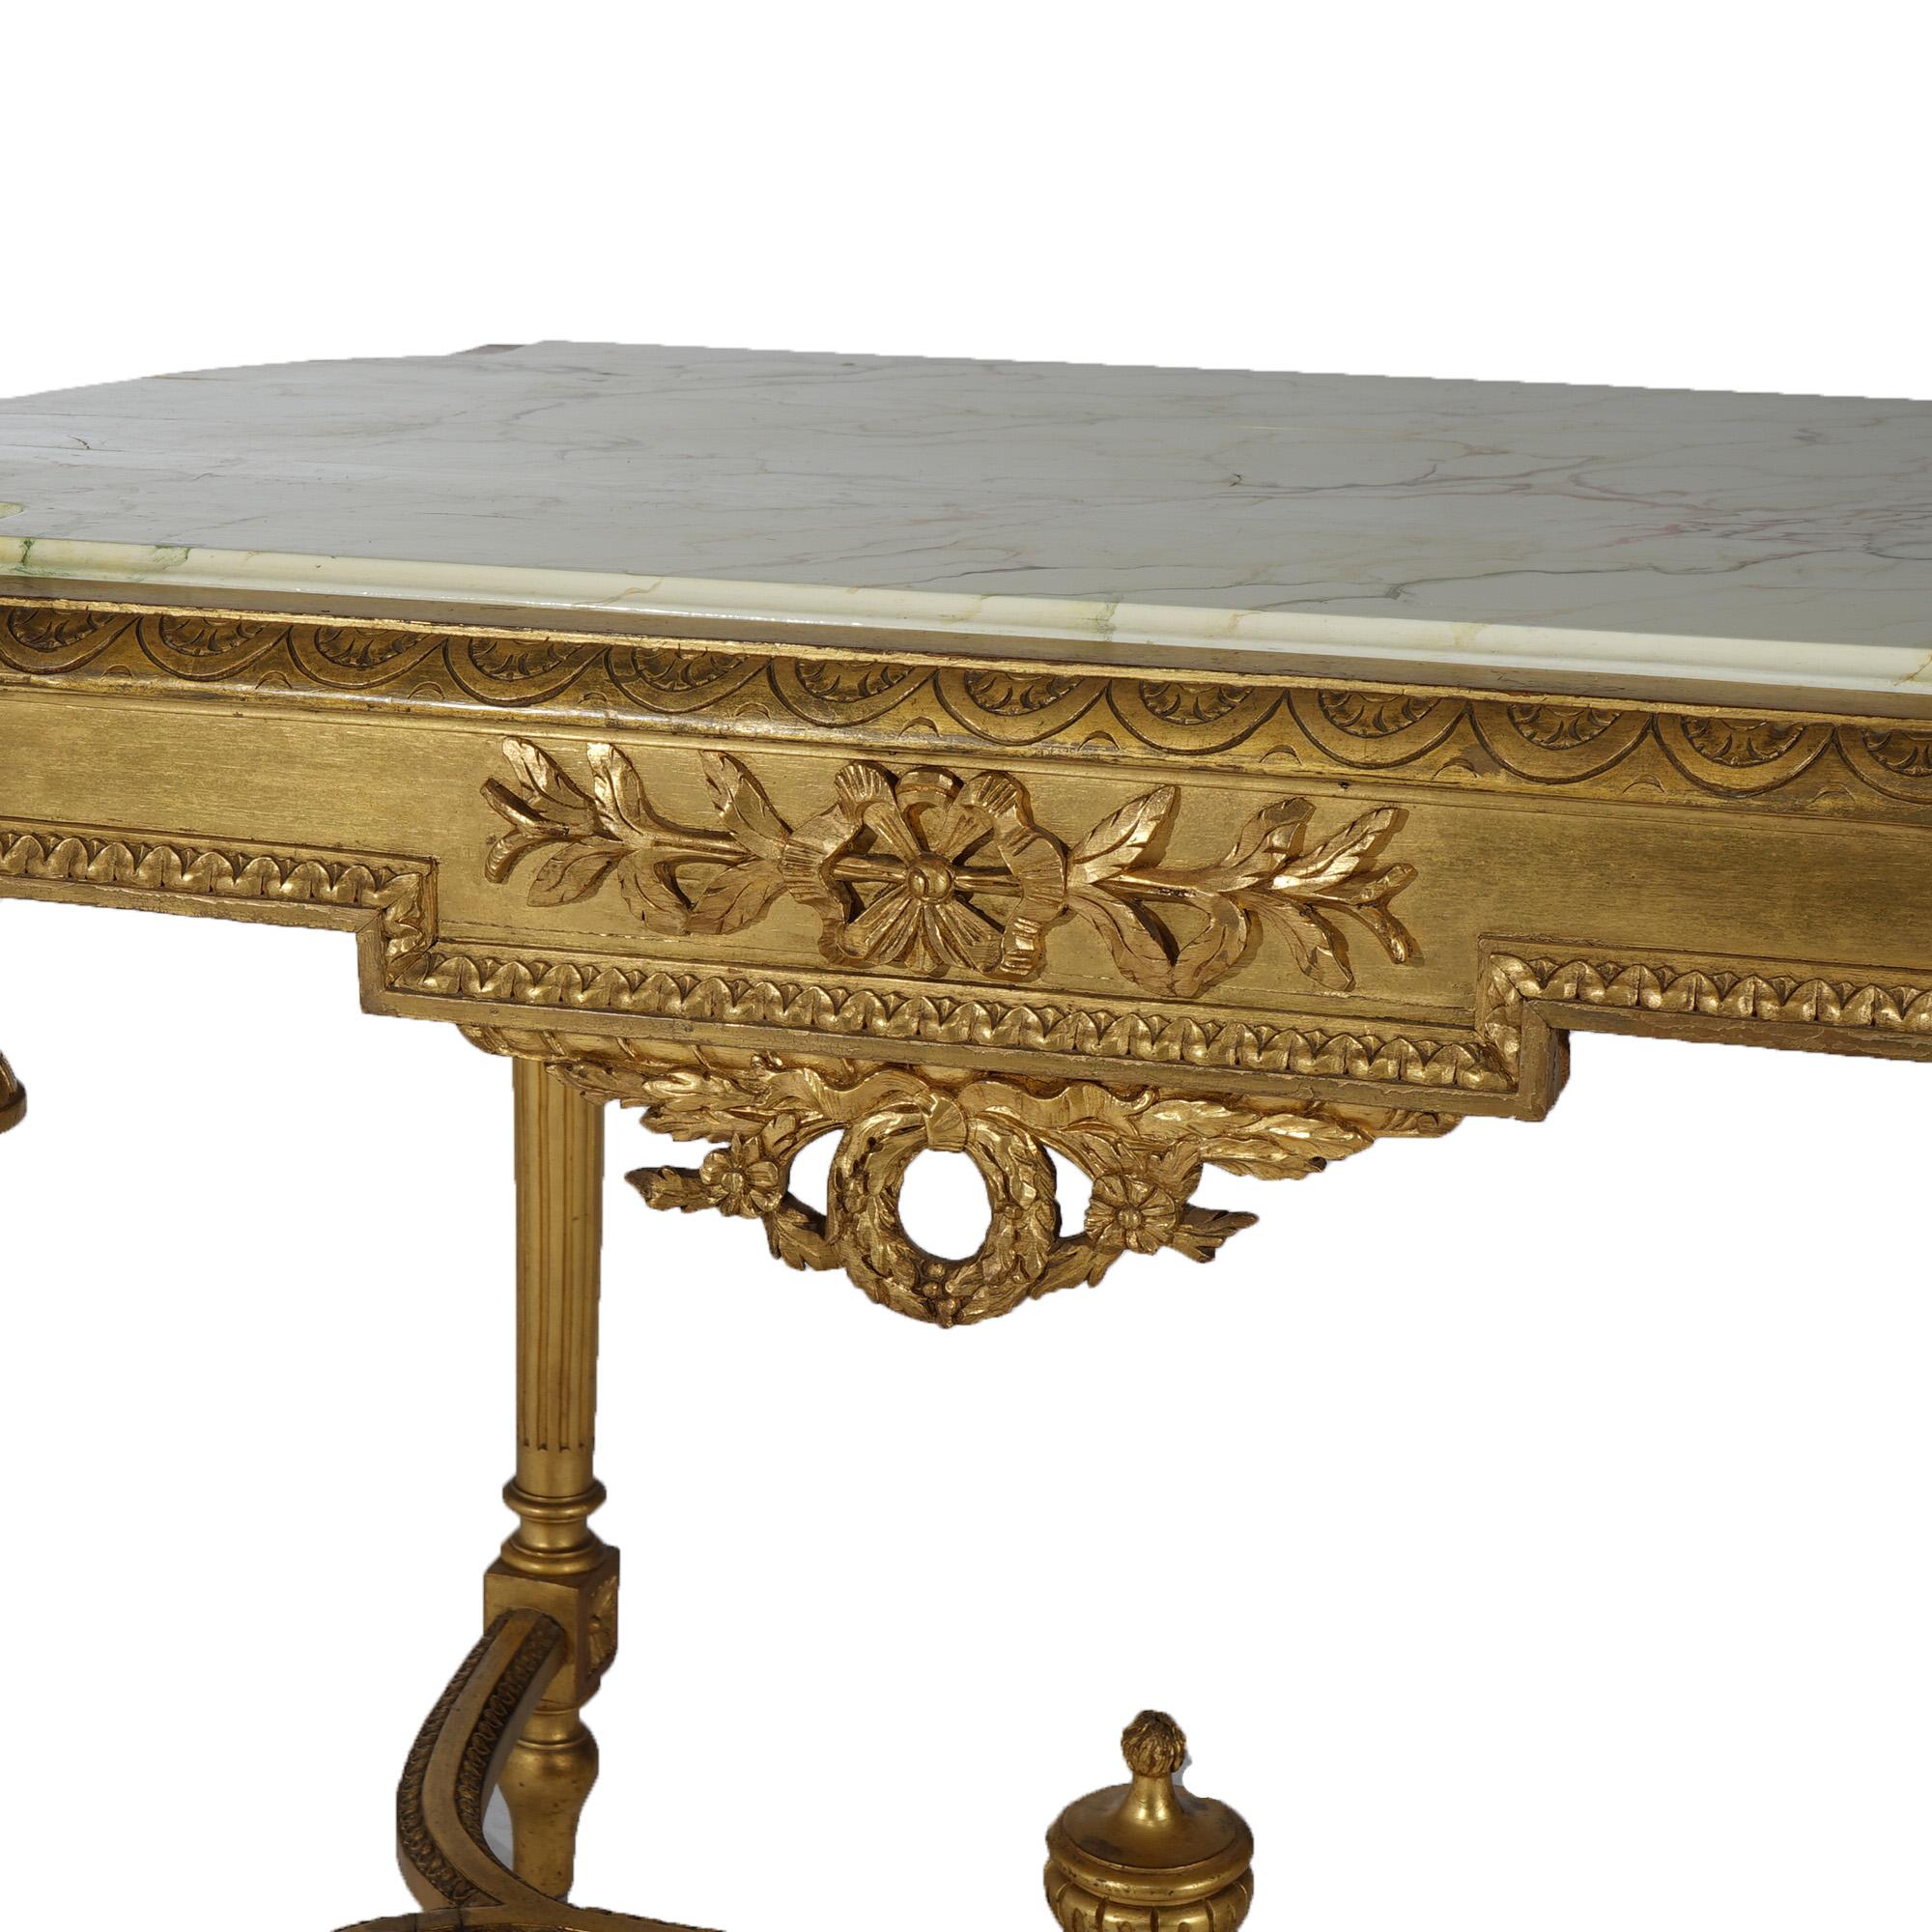 Antique French Louis XVI Style Giltwood Parlor Table with Faux Painted Top 19thC For Sale 15